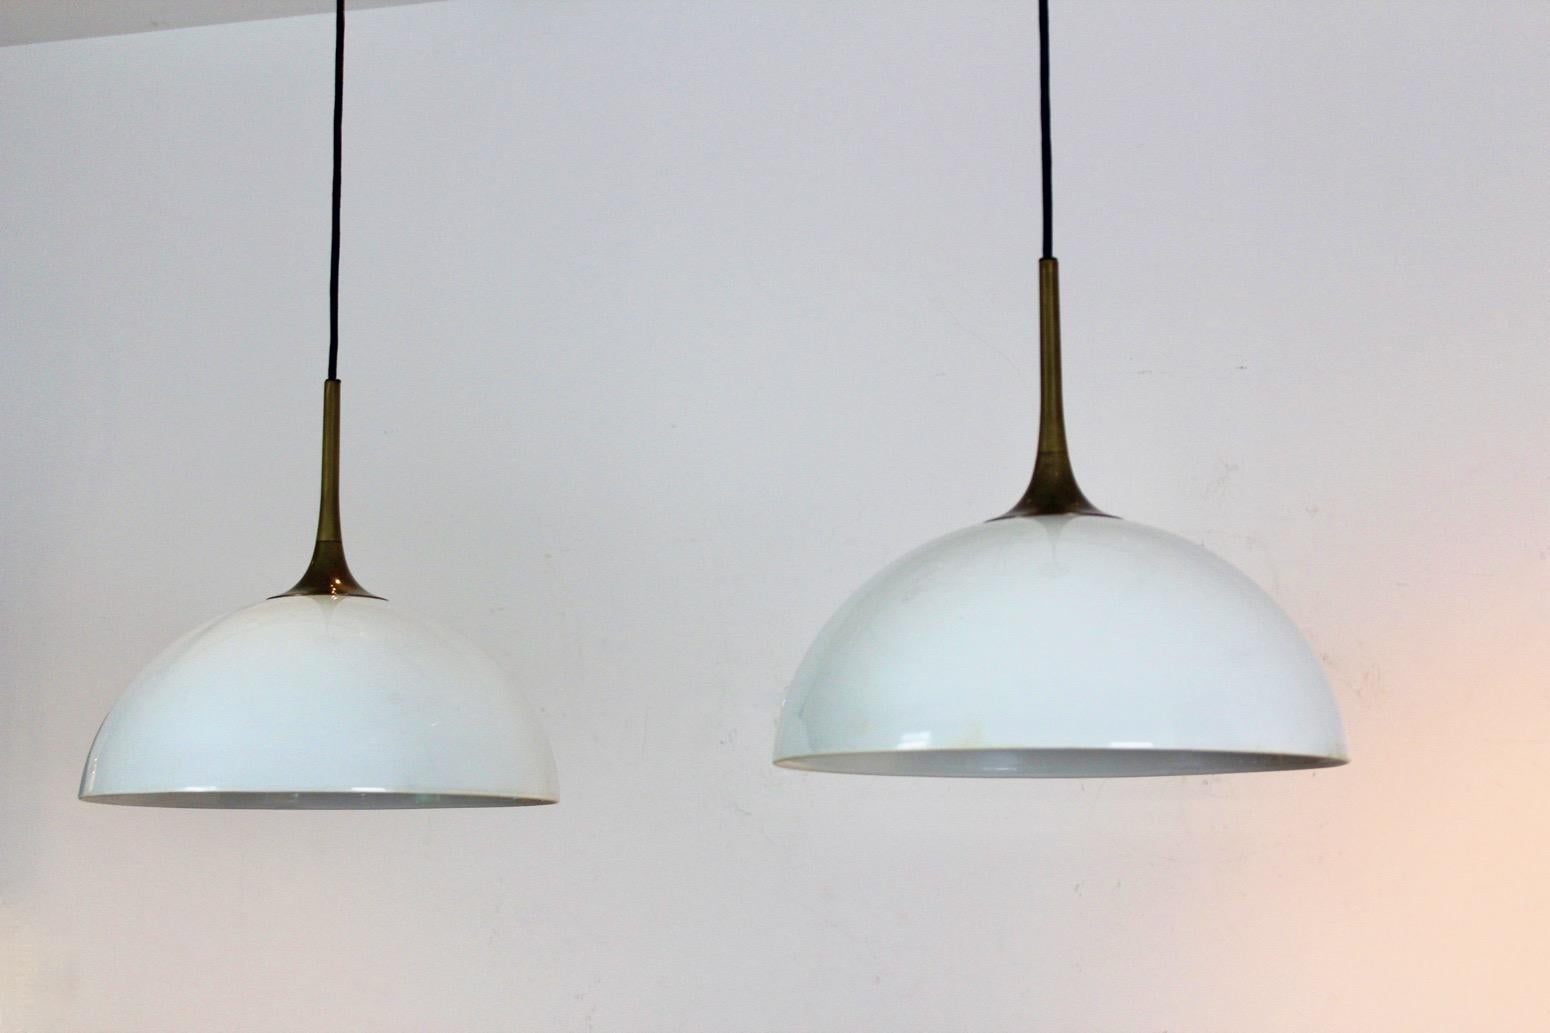 Elegant Pair of Brass and White-Opal Glass Pendant Lights by Florian Schulz For Sale 1